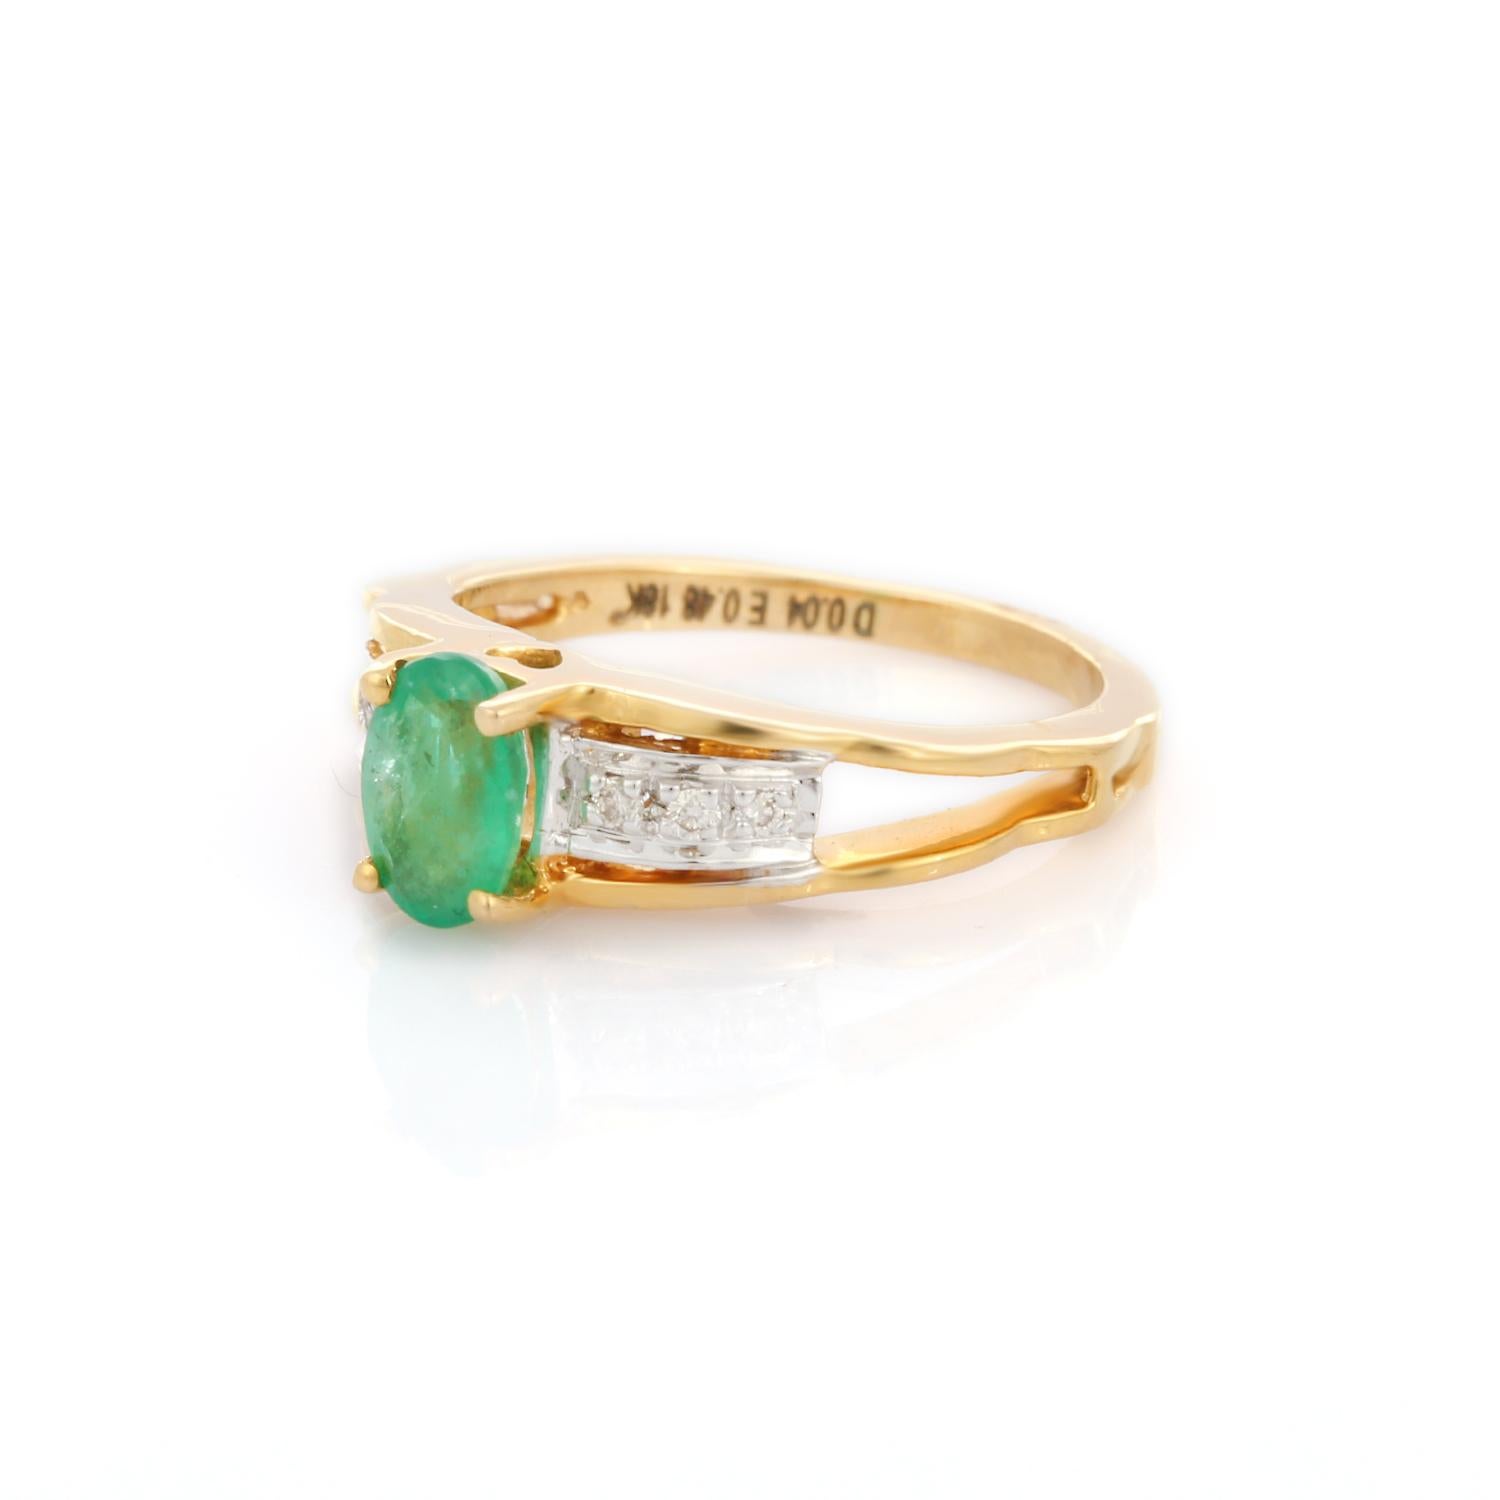 For Sale:  18K Yellow Gold Oval Shaped Emerald Ring with Diamonds 5